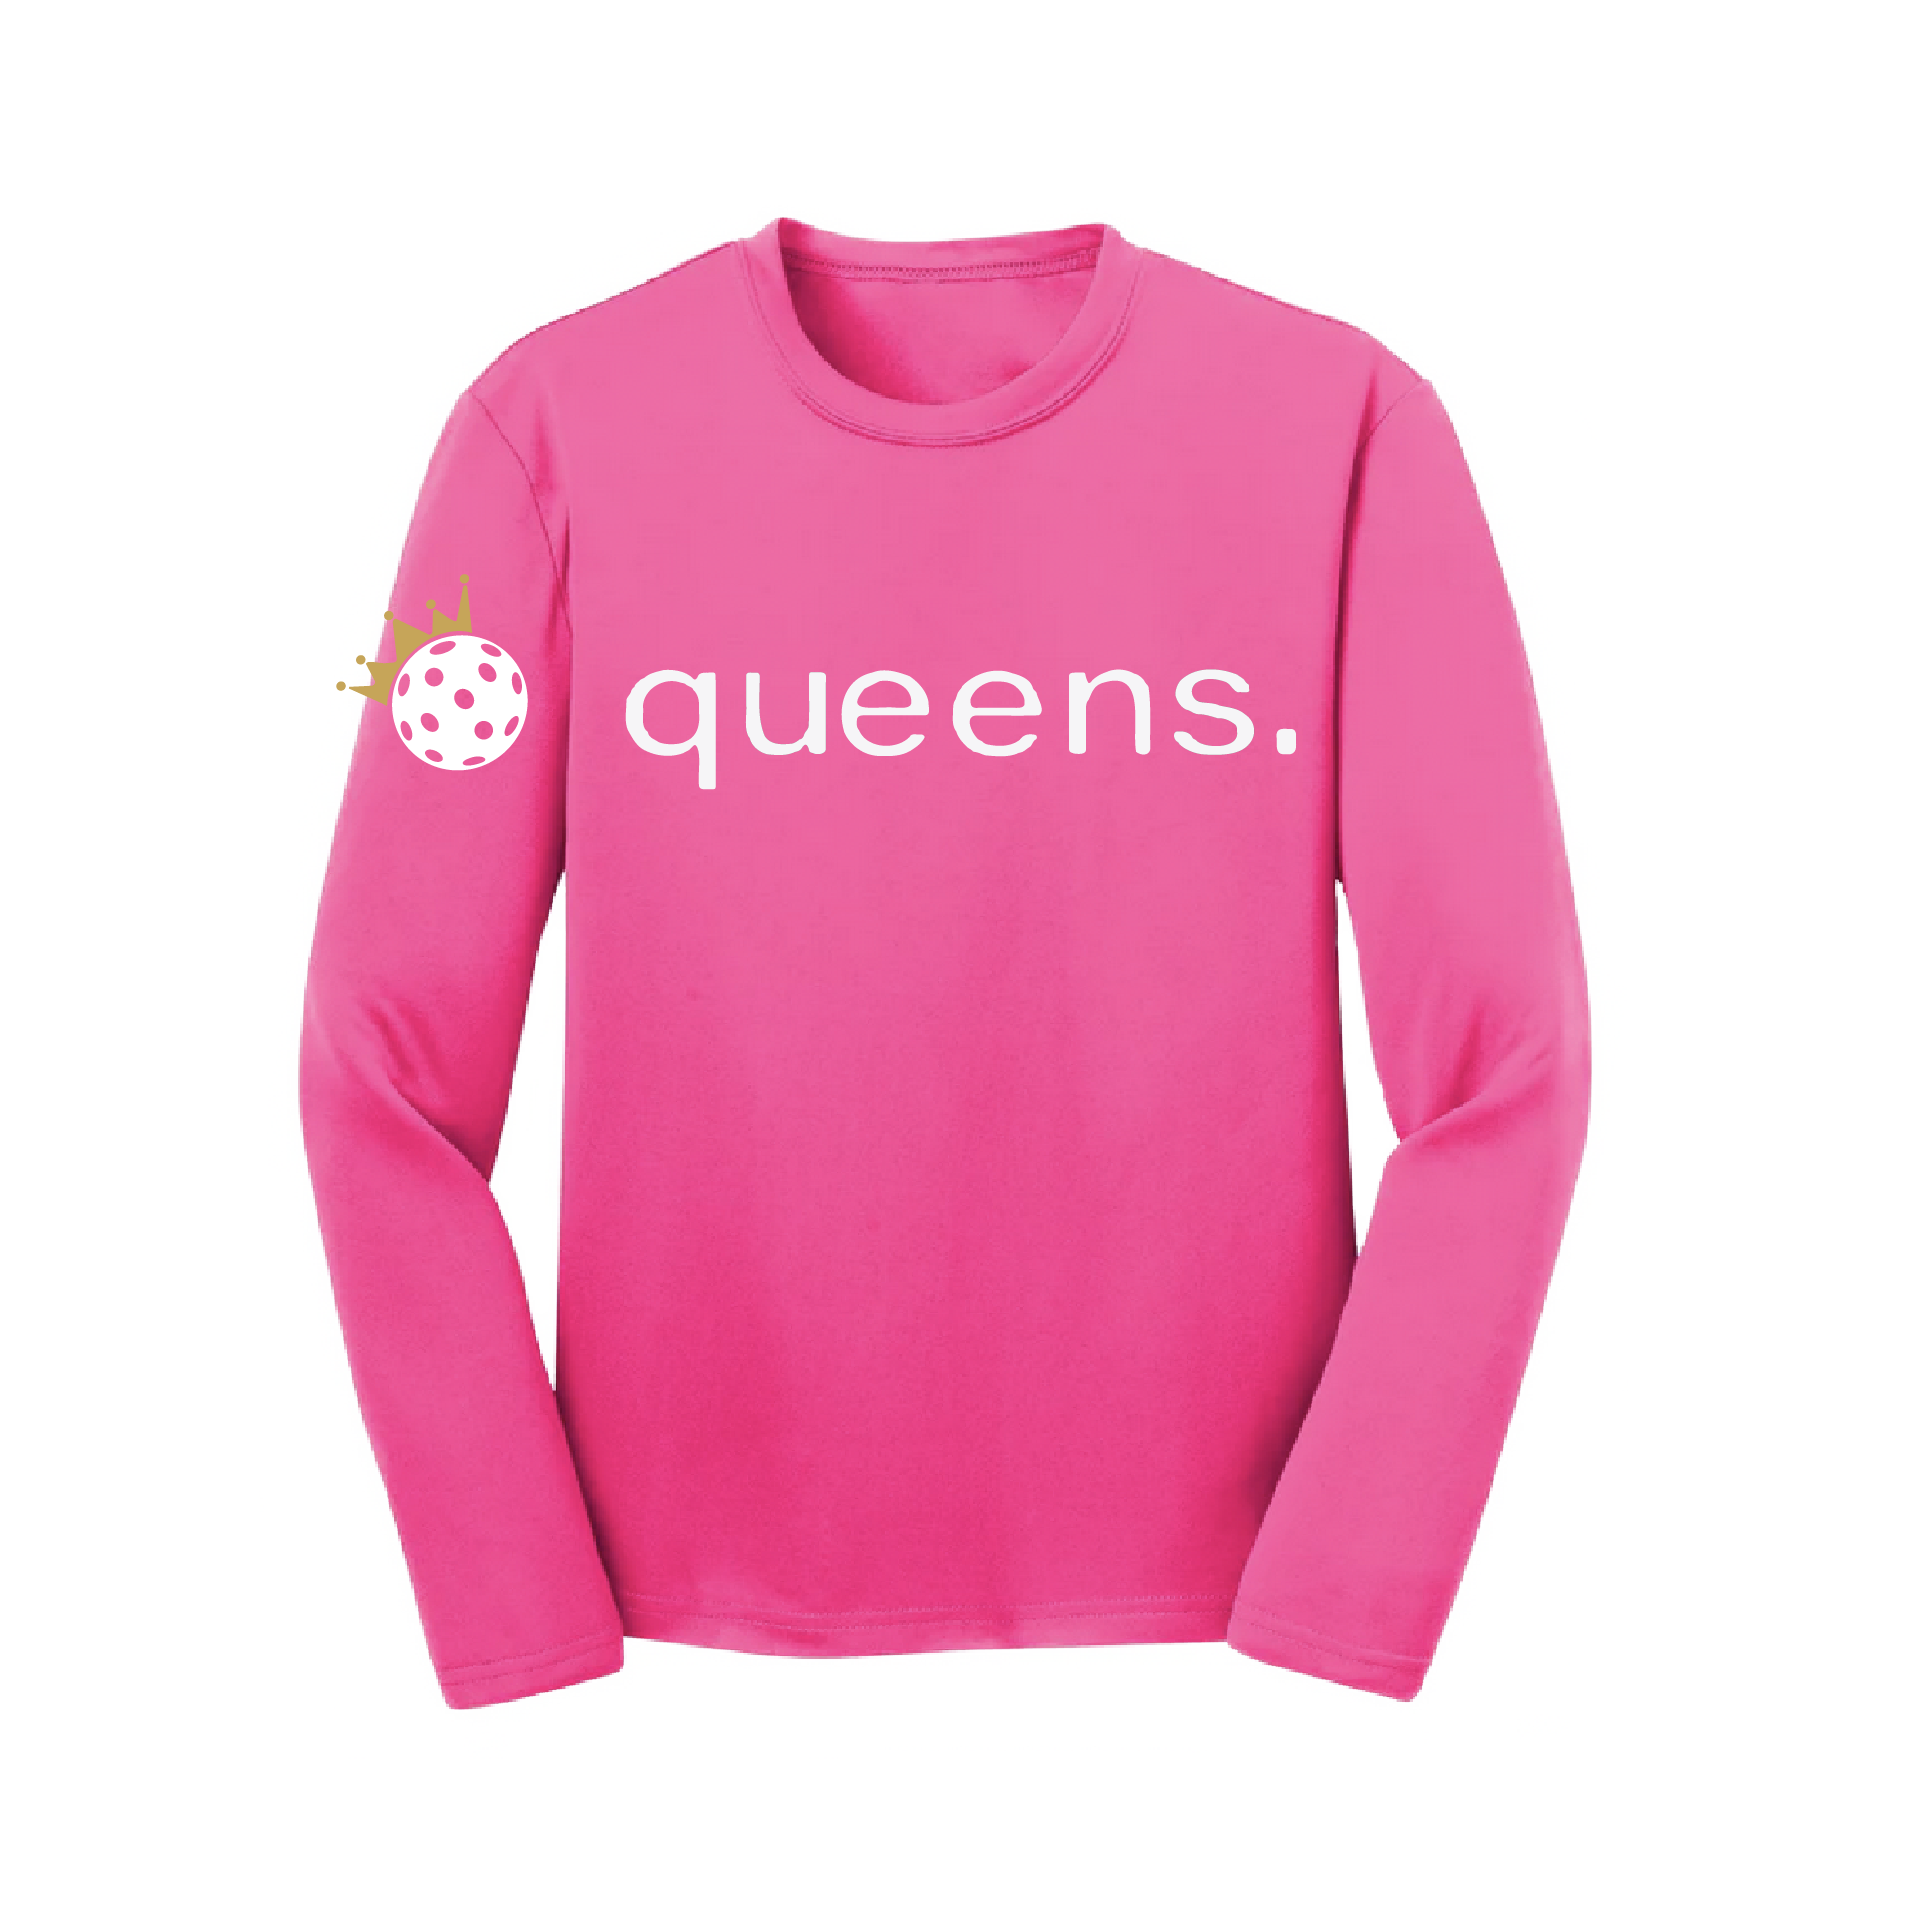 Our Pickleball Queen and Crown Youth Long Sleeve Shirts are designed for all athletic activities. Lightweight and breathable, our shirts feature PosiCharge technology that locks in color and prevents logo fading. Comfortably designed, each shirt also features a removable tag and set-in sleeves. Our shirts are designed with the athlete in mind, providing a full range of motion and maximum breathability. 